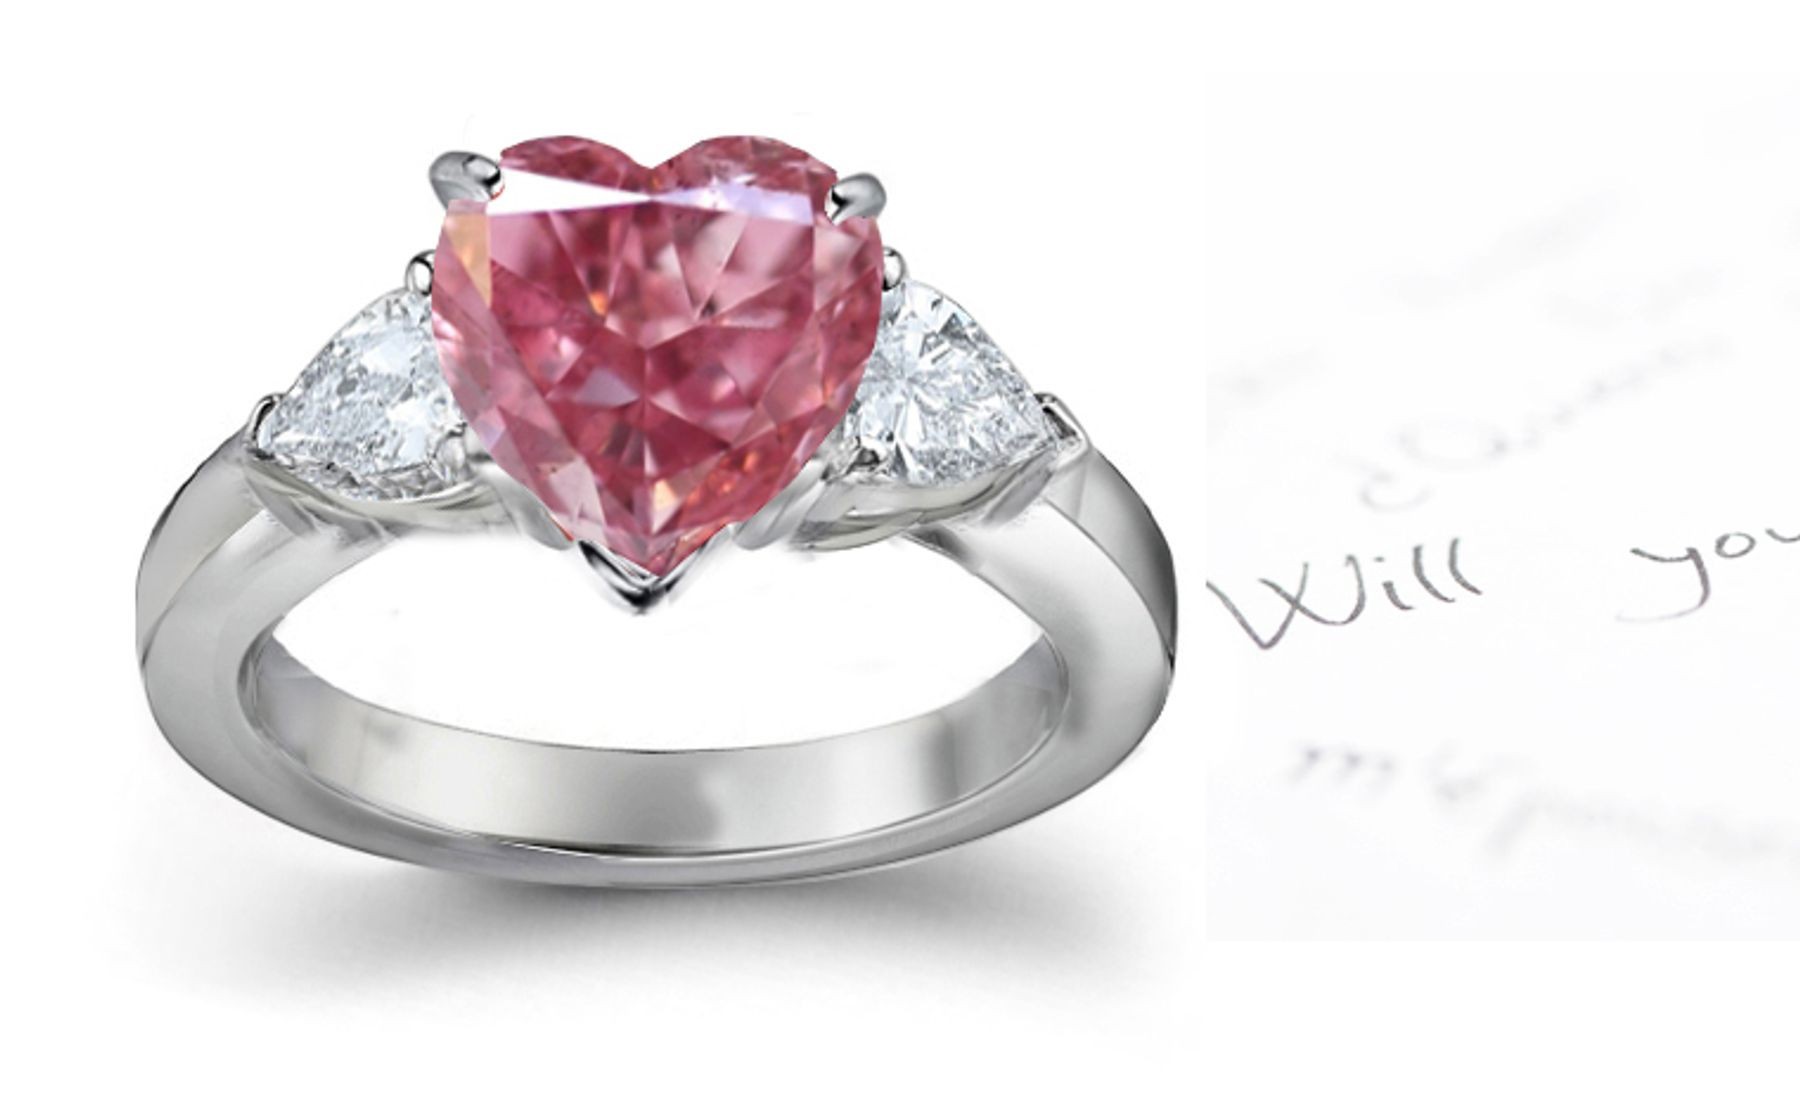 Twinkling Center Heart Pink Diamond & Pear Shape Side Diamond Accents Engagement Ring in Pink Gold